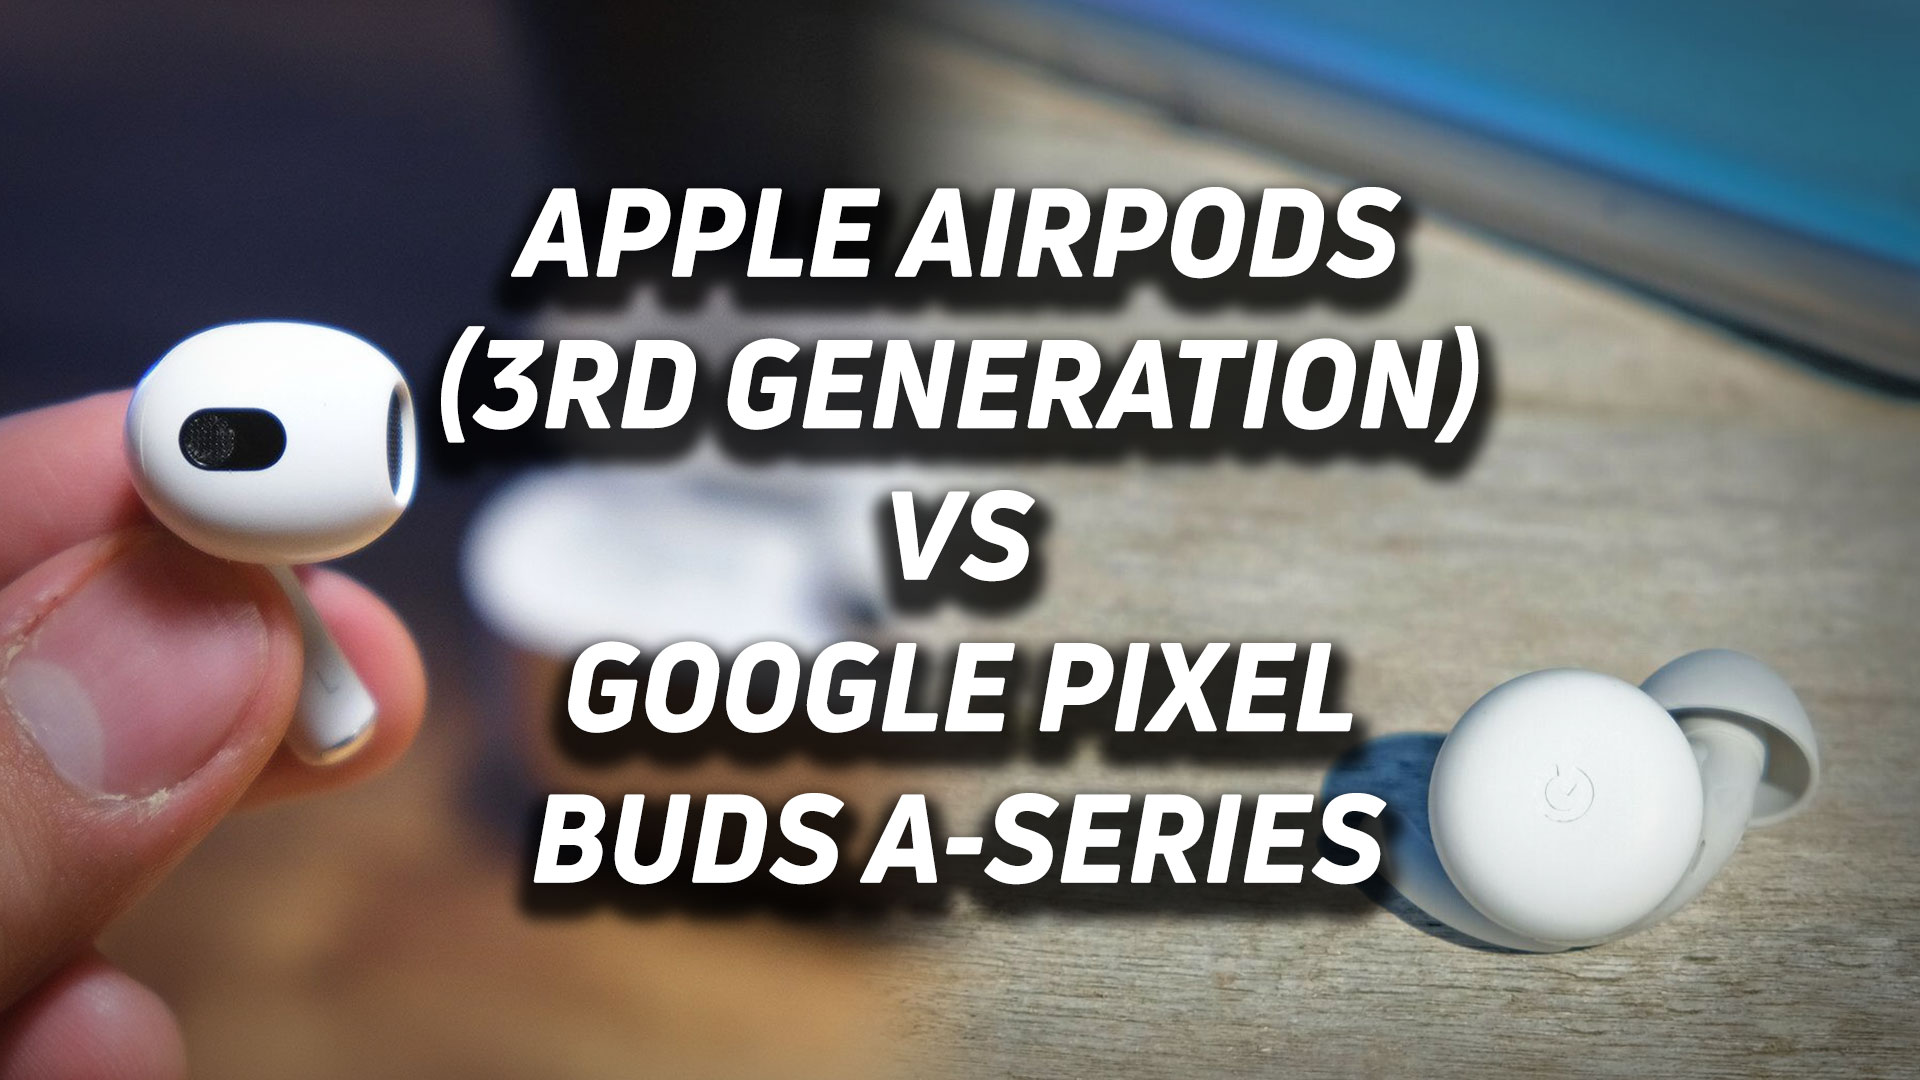 A blended image of the Apple AirPods (3rd generation) vs Google Pixel Buds A-Series with the versus text overlaid.